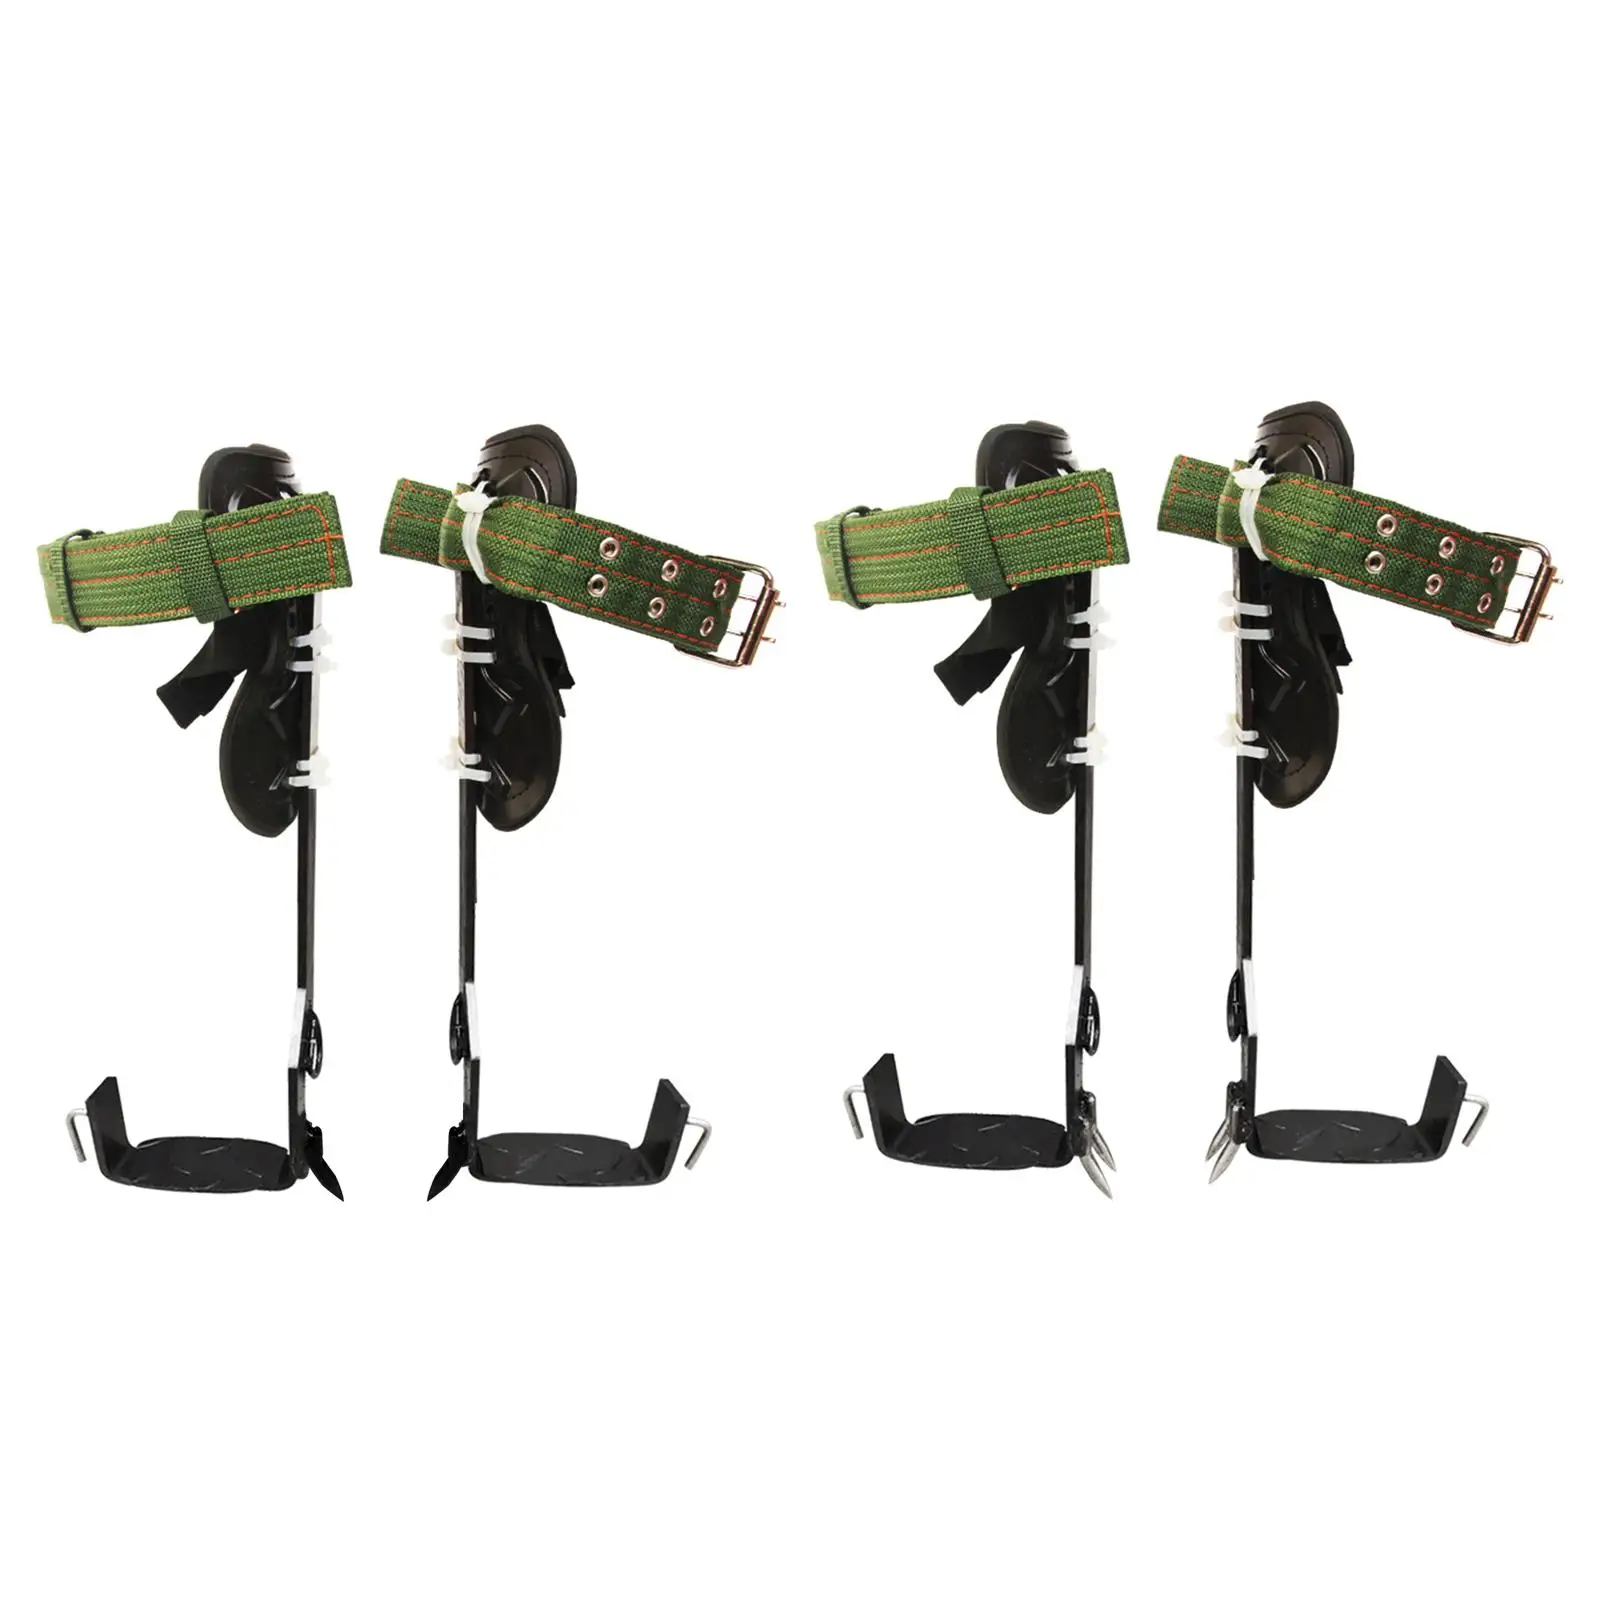 Tree Climbing Spike Set High Altitude W/ Lanyard W/ Ankle Straps Adjustable Tree Climber for Outdoor Jungle Survival Hunting